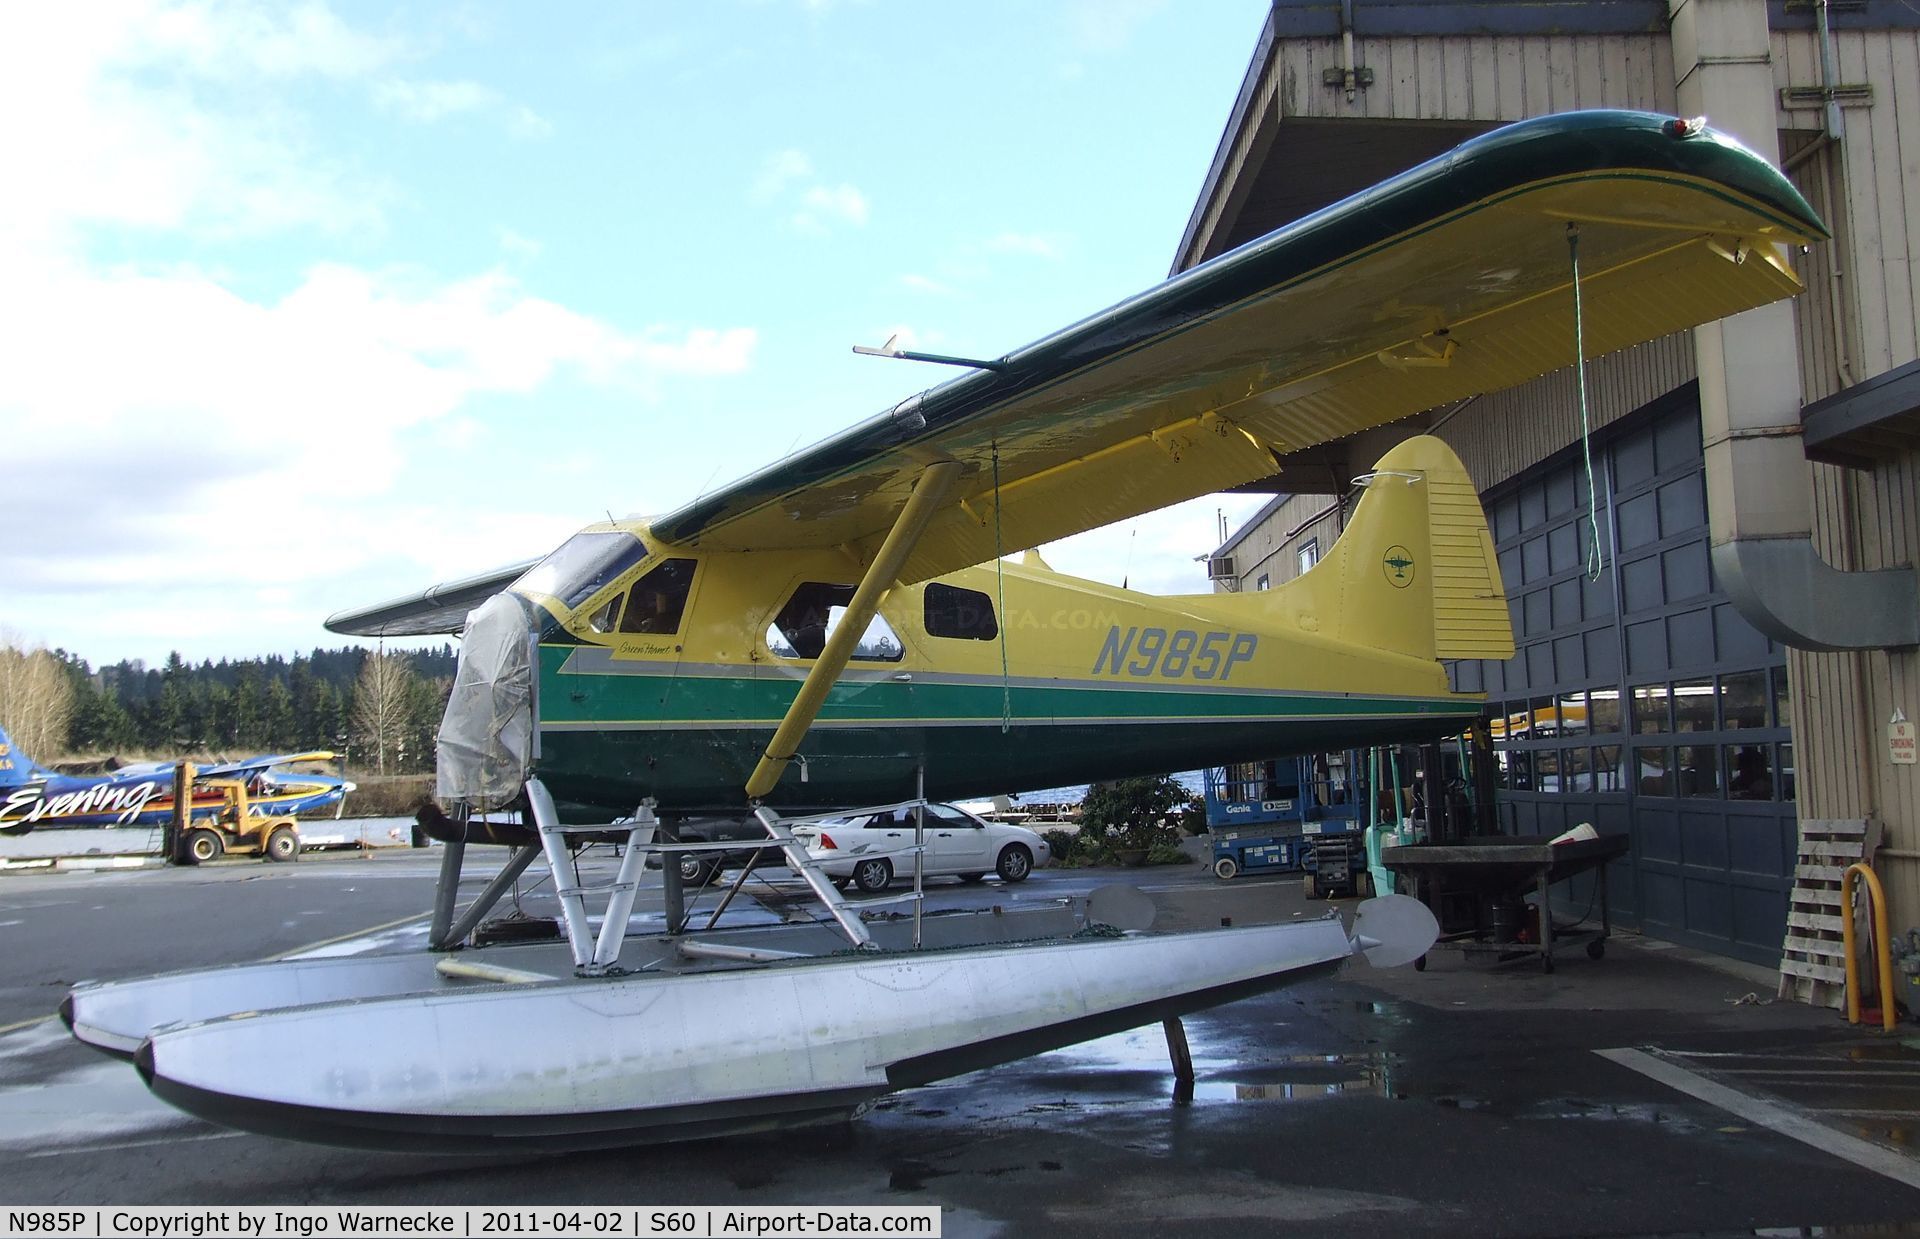 N985P, 1966 De Havilland Canada DHC-2 MK. I(L20A) C/N 1624, De Havilland Canada DHC-2 Beaver on floats (minus engine) at Kenmore Air Harbor, Kenmore WA